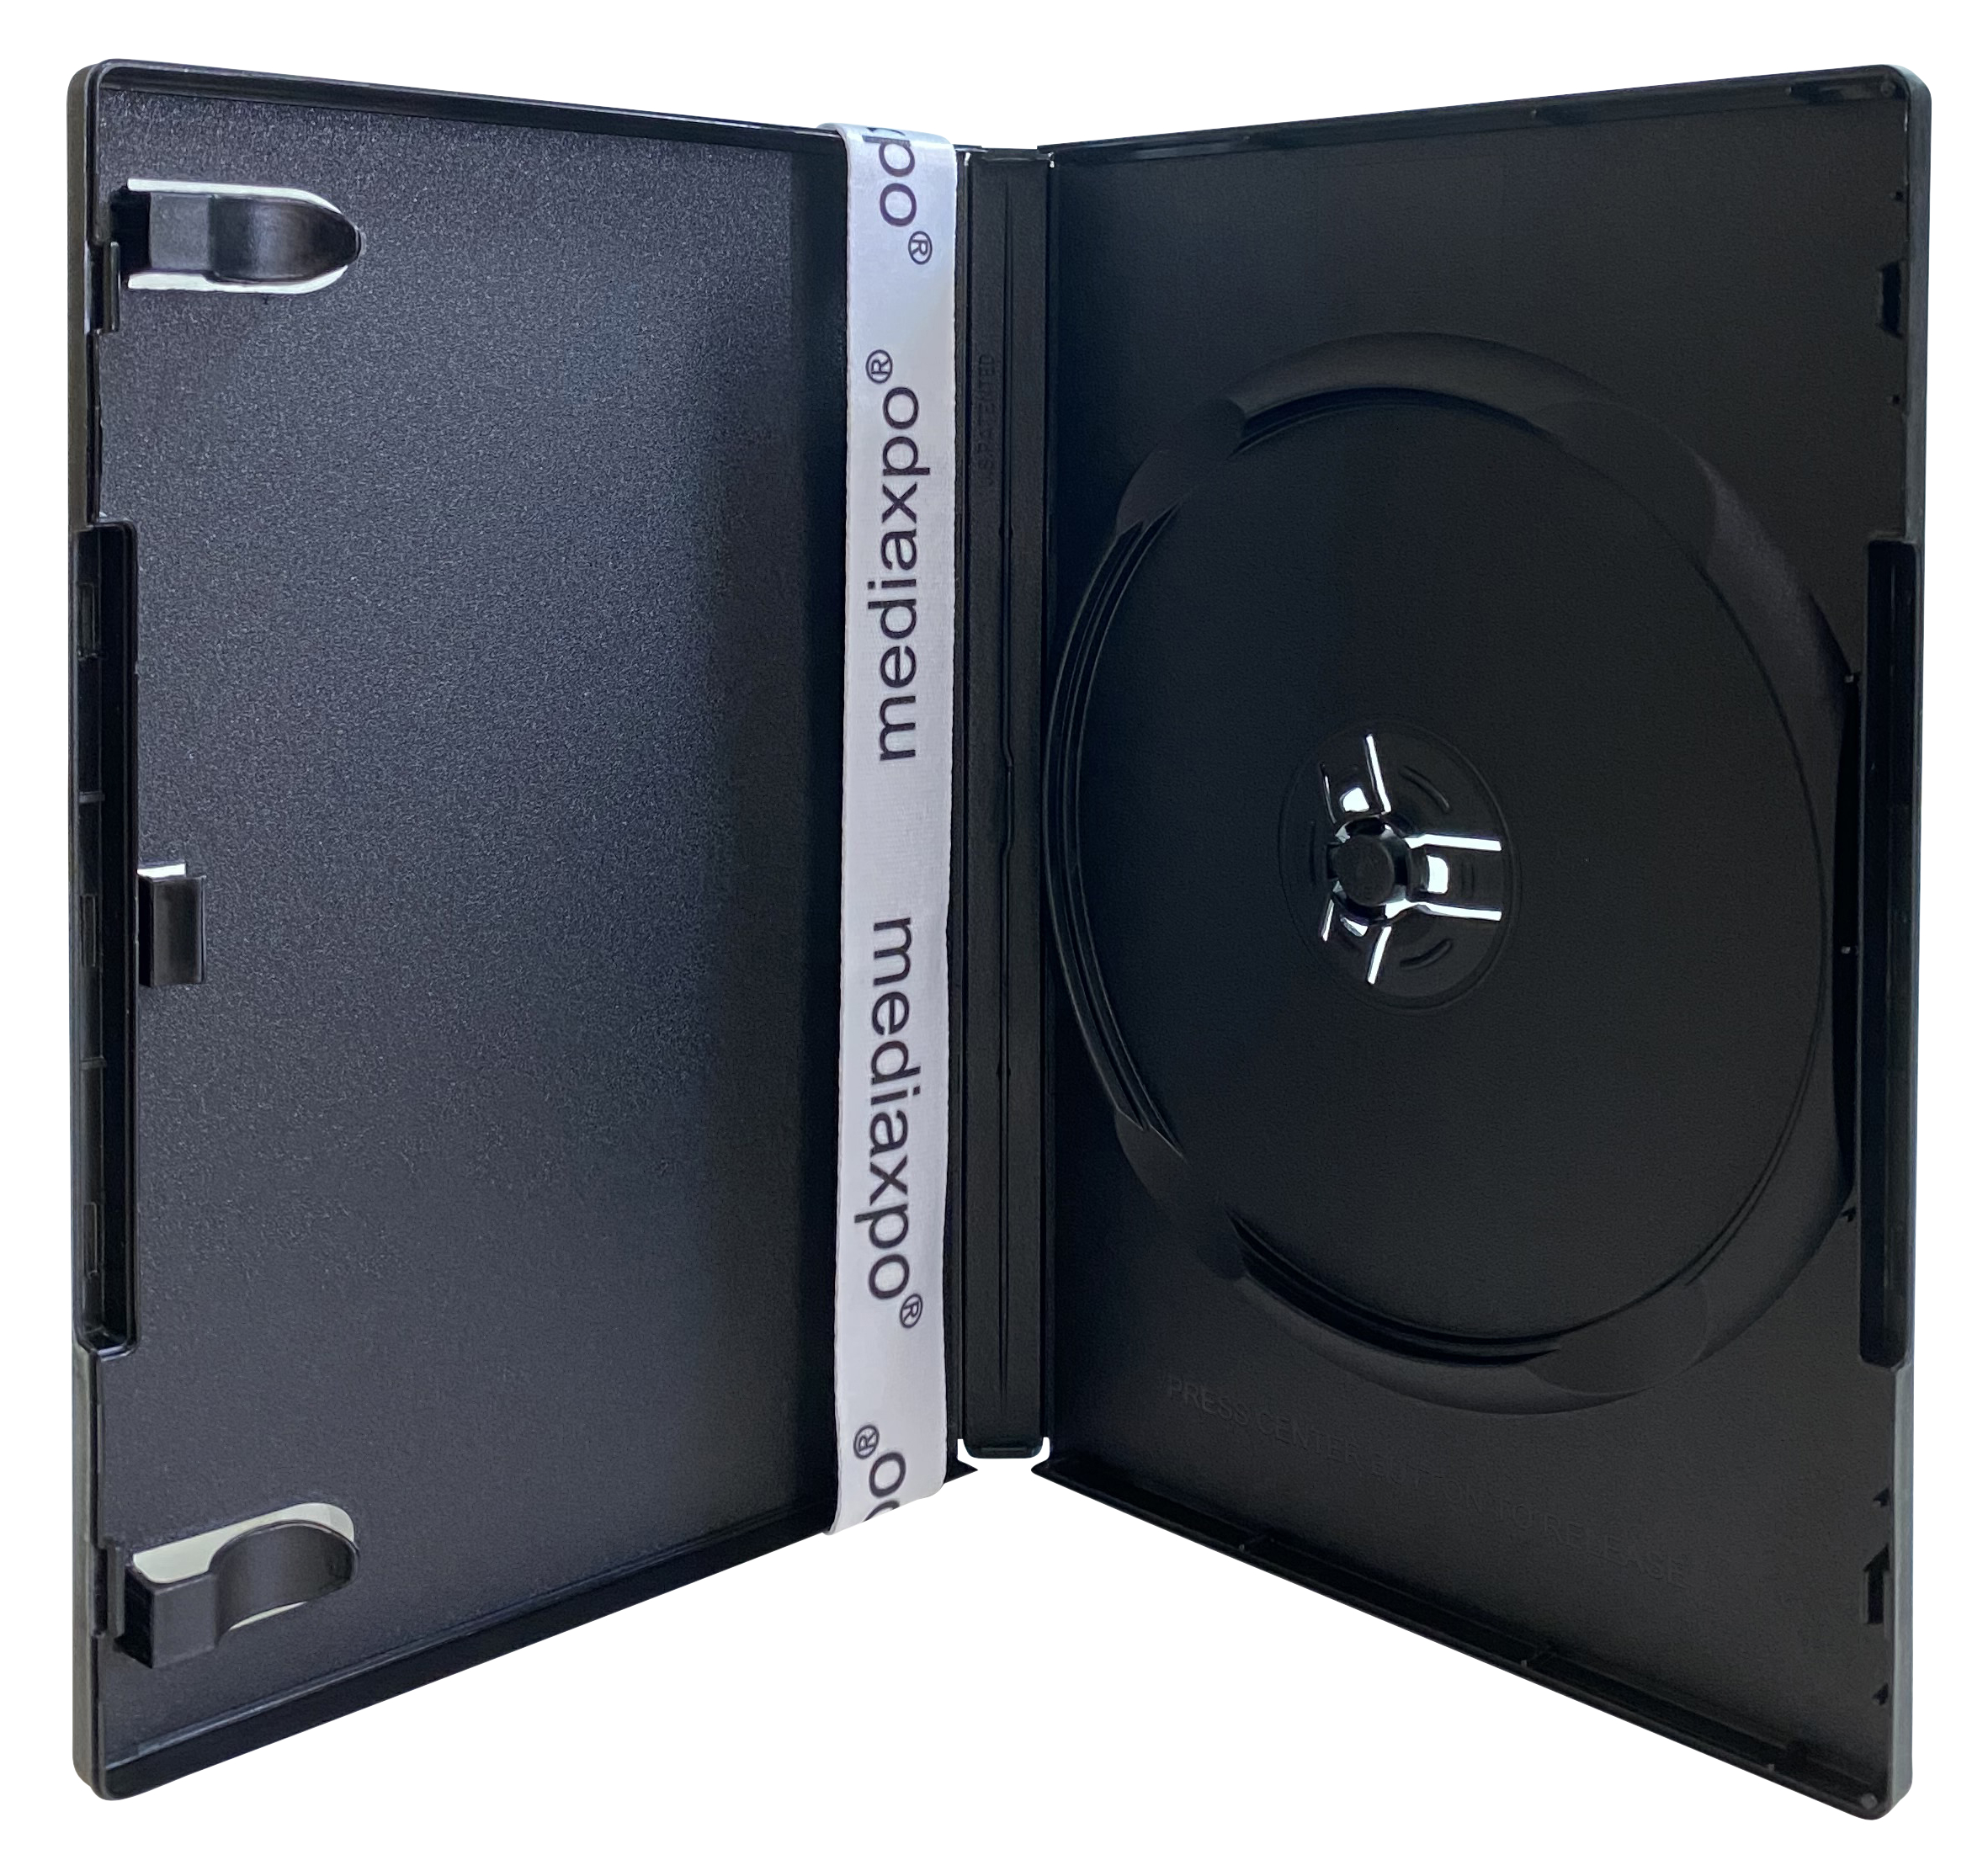 Image of ID 1214259183 400 PREMIUM STANDARD Black Single DVD Cases 14MM (100% New Material)